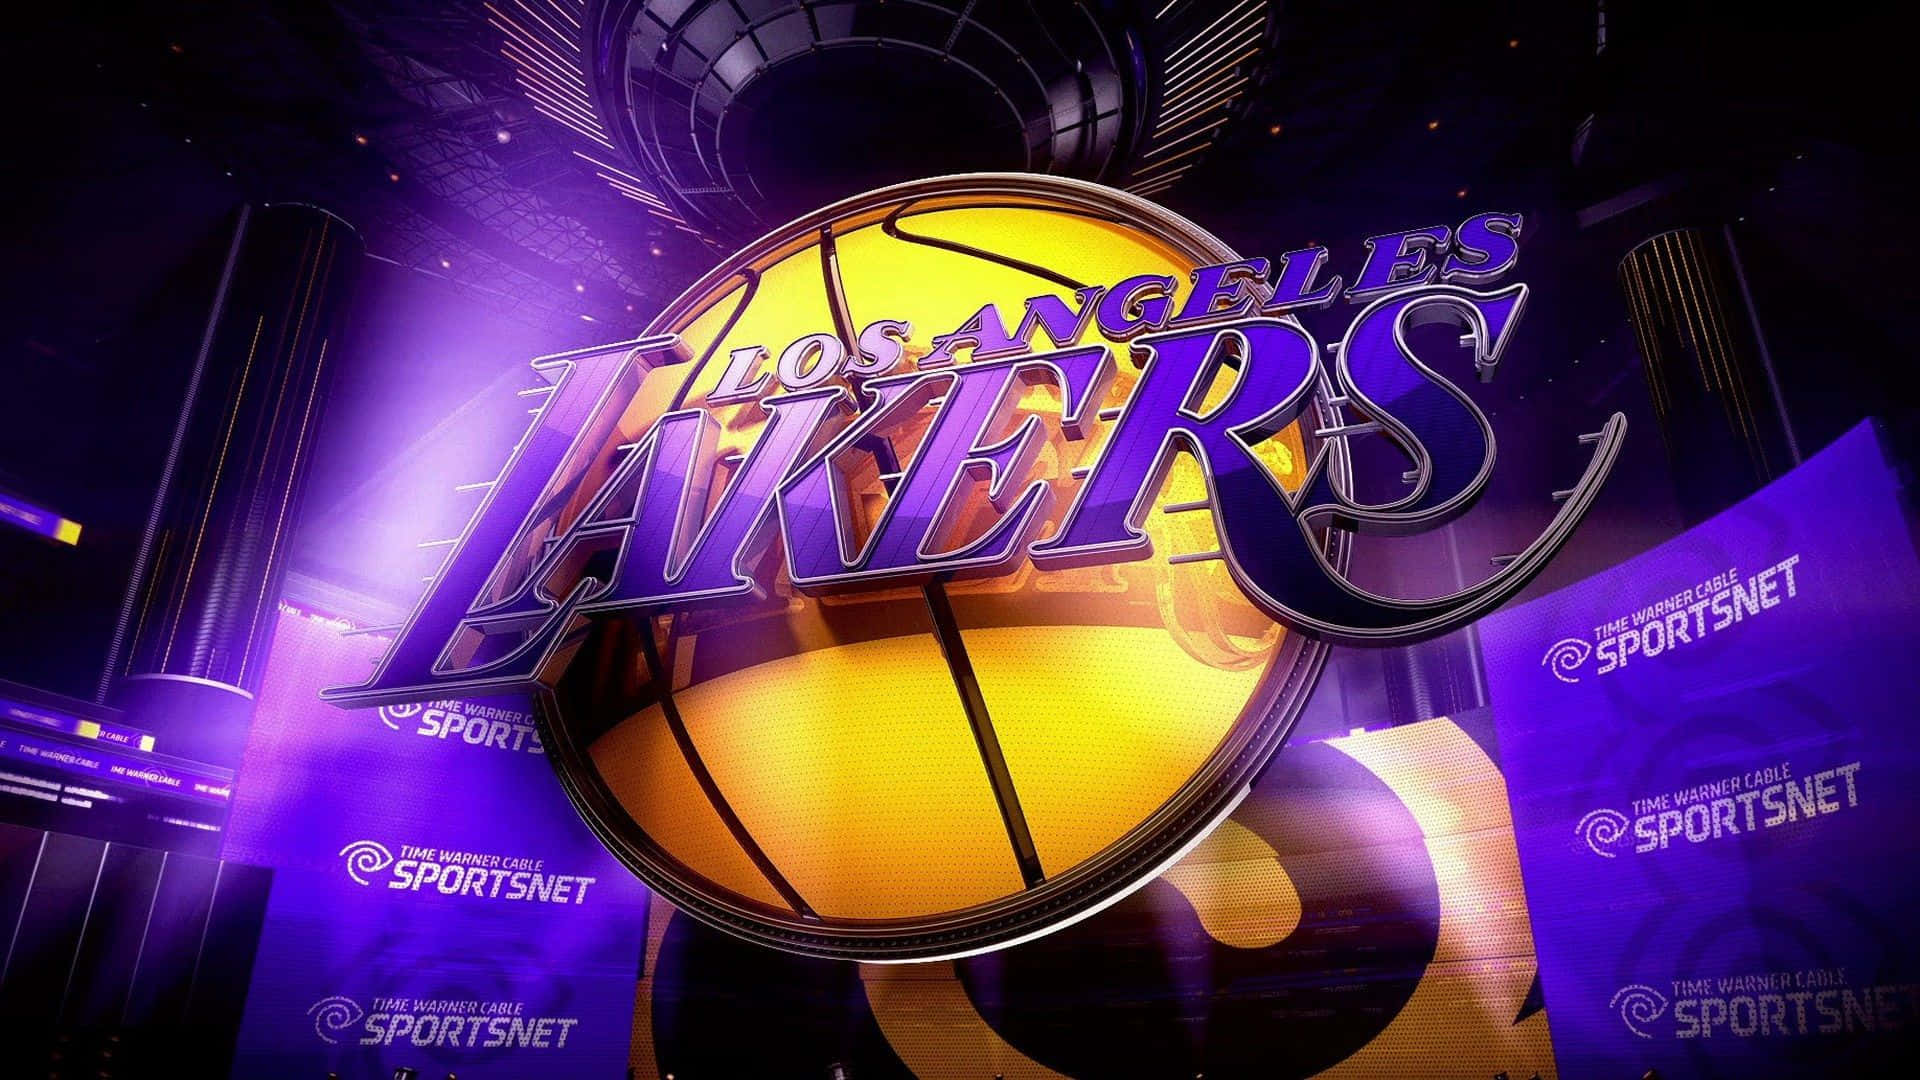 Get behind the Los Angeles Lakers on their journey to greatness